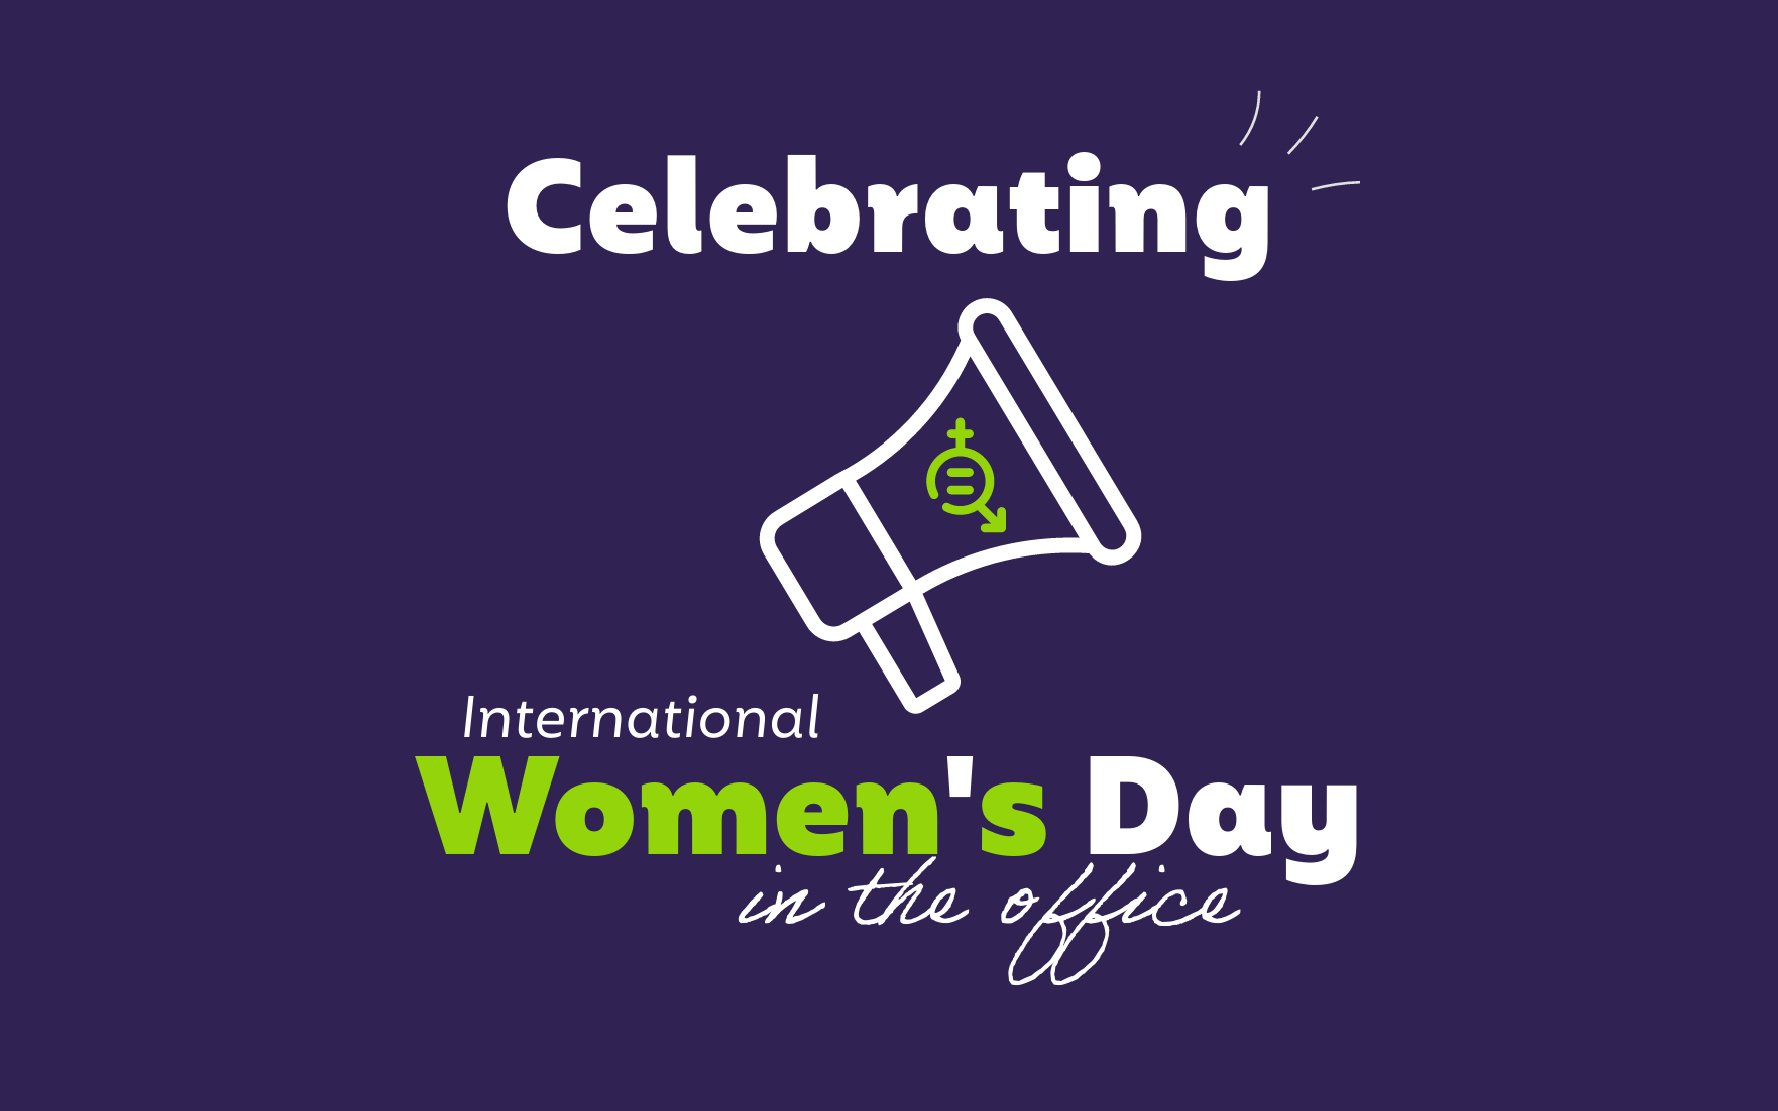 How to celebrate IWD at your office: our 5 top tips